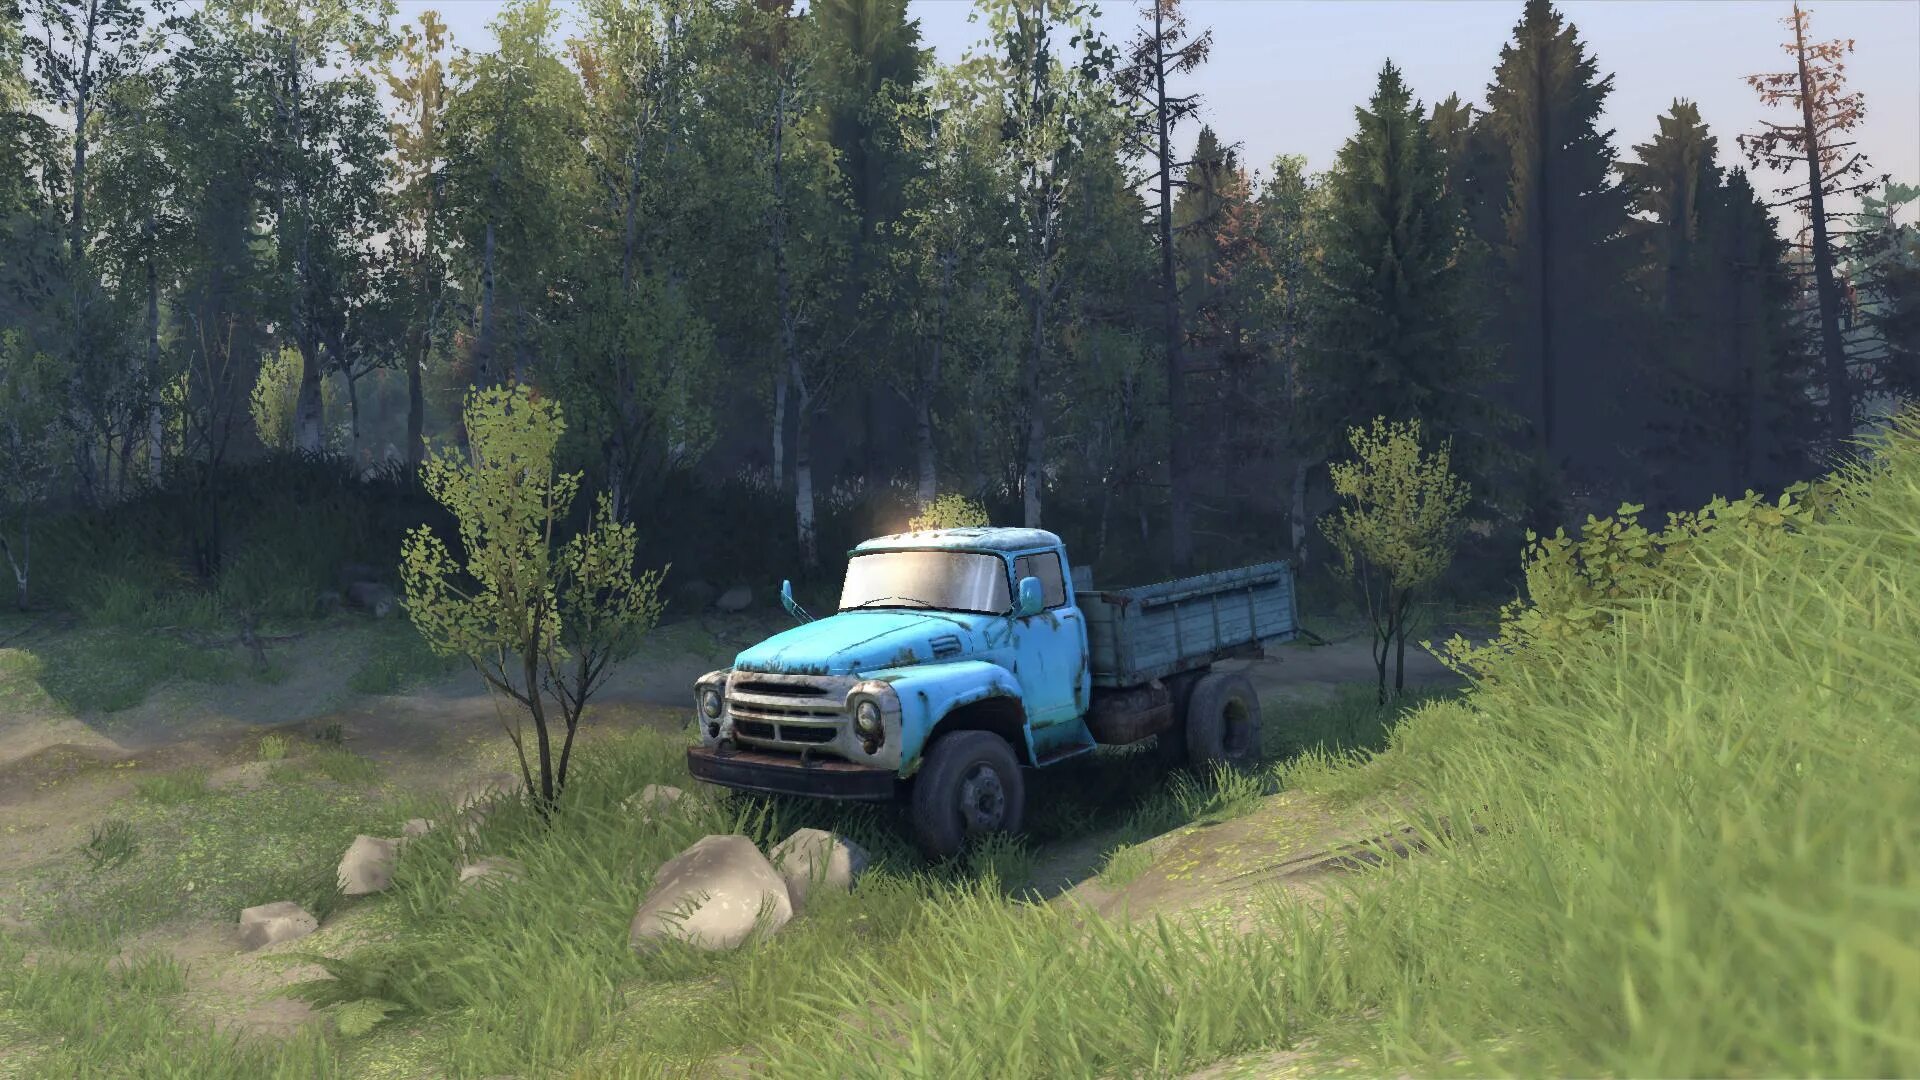 Expeditions a mudrunner game чит. МТЗ 50 Spin Tires. Испинтерес. SPINTIRES: MUDRUNNER. Spin Tires Скриншоты.